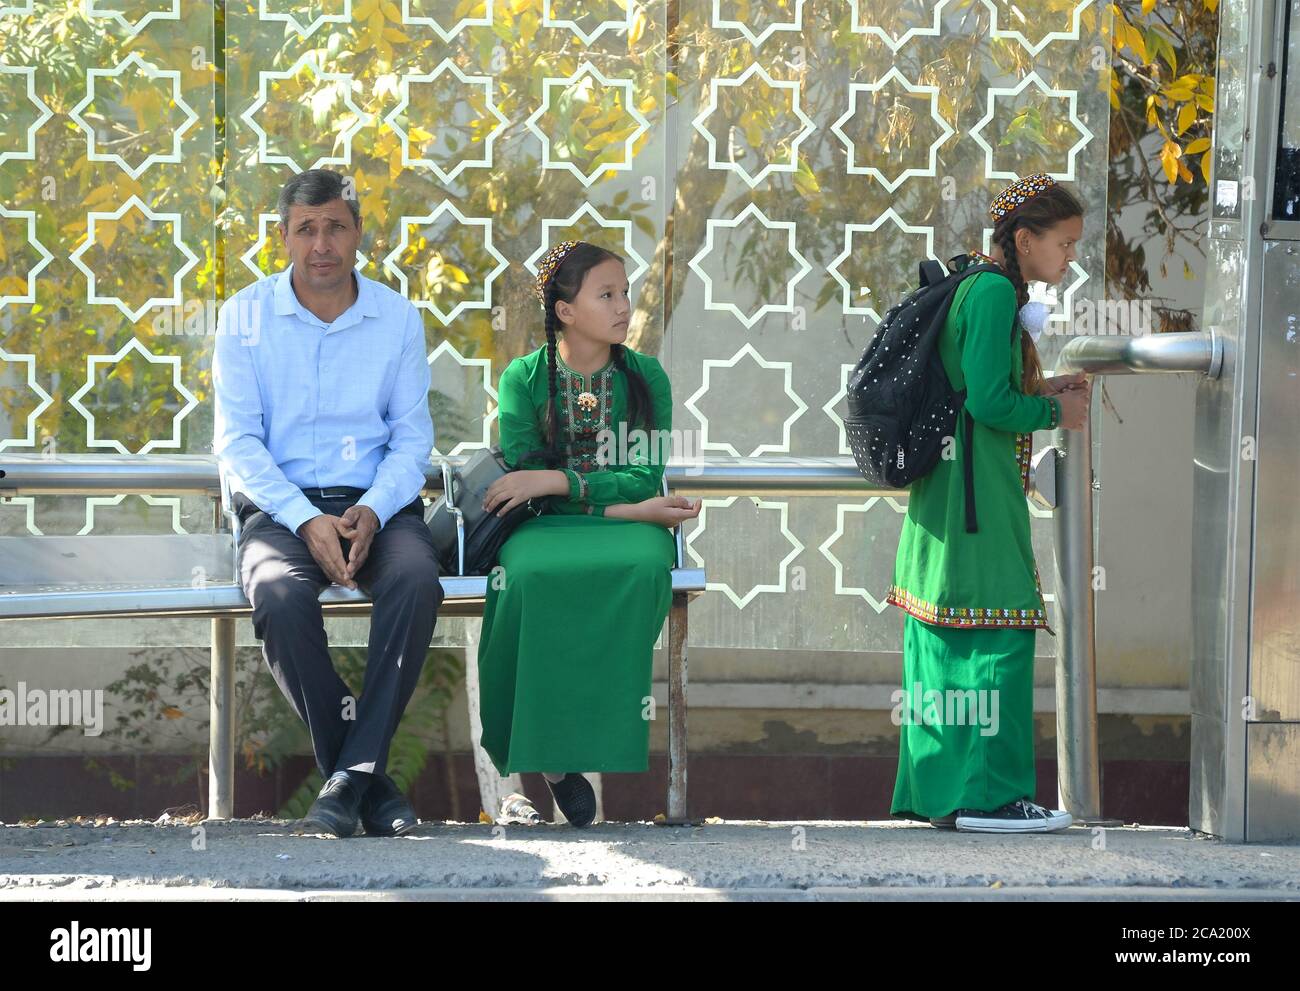 Young turkmen girls wearing the Turkmenistan national green dress used as school uniform accompanied by thoughtful man in a bus stop in Ashgabat. Stock Photo